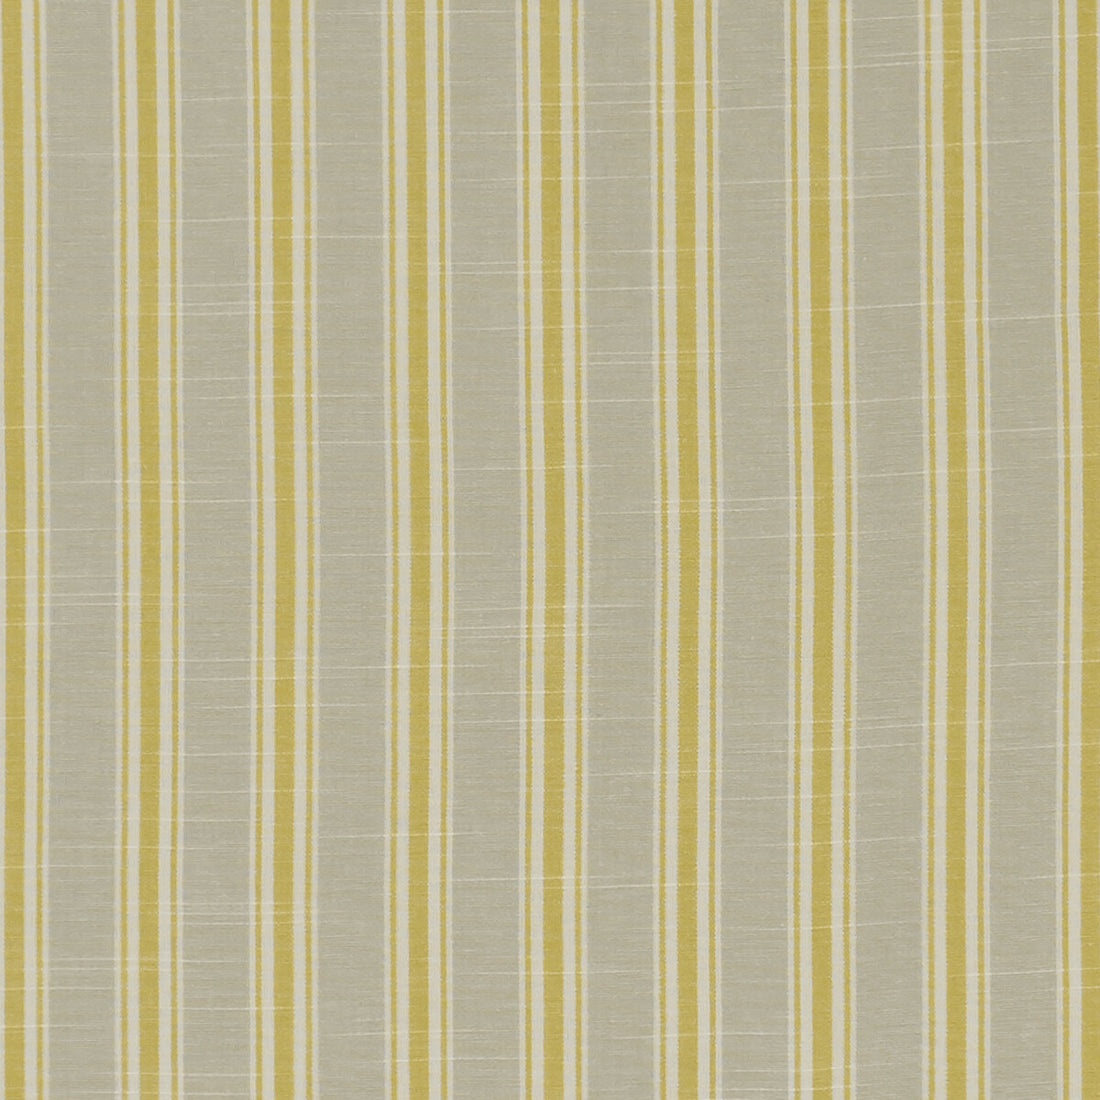 Thornwick fabric in citrus color - pattern F1311/03.CAC.0 - by Clarke And Clarke in the Bempton By Studio G For C&amp;C collection